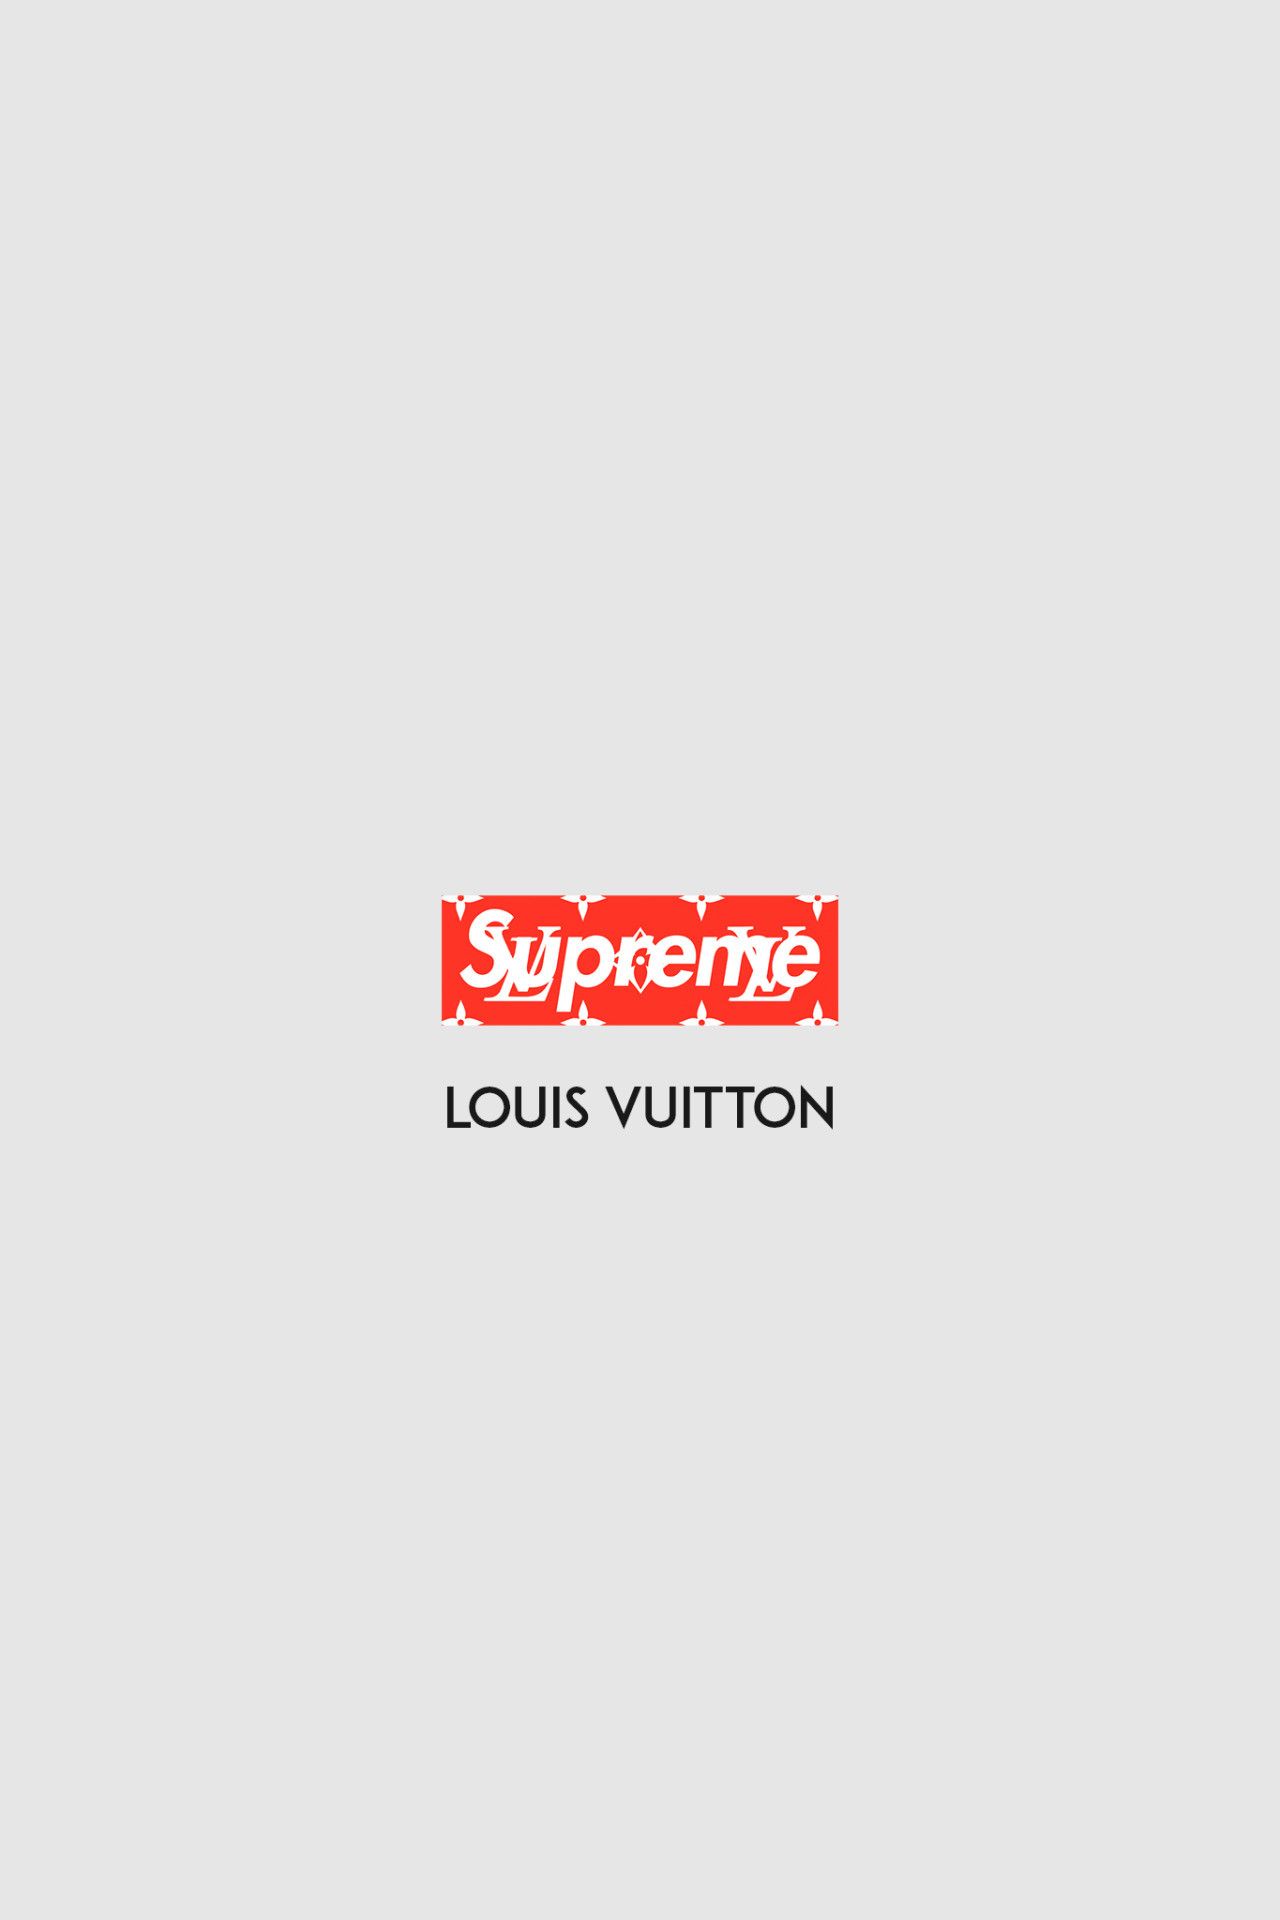 Supreme iPhone Wallpapers Top Free Supreme iPhone Backgrounds